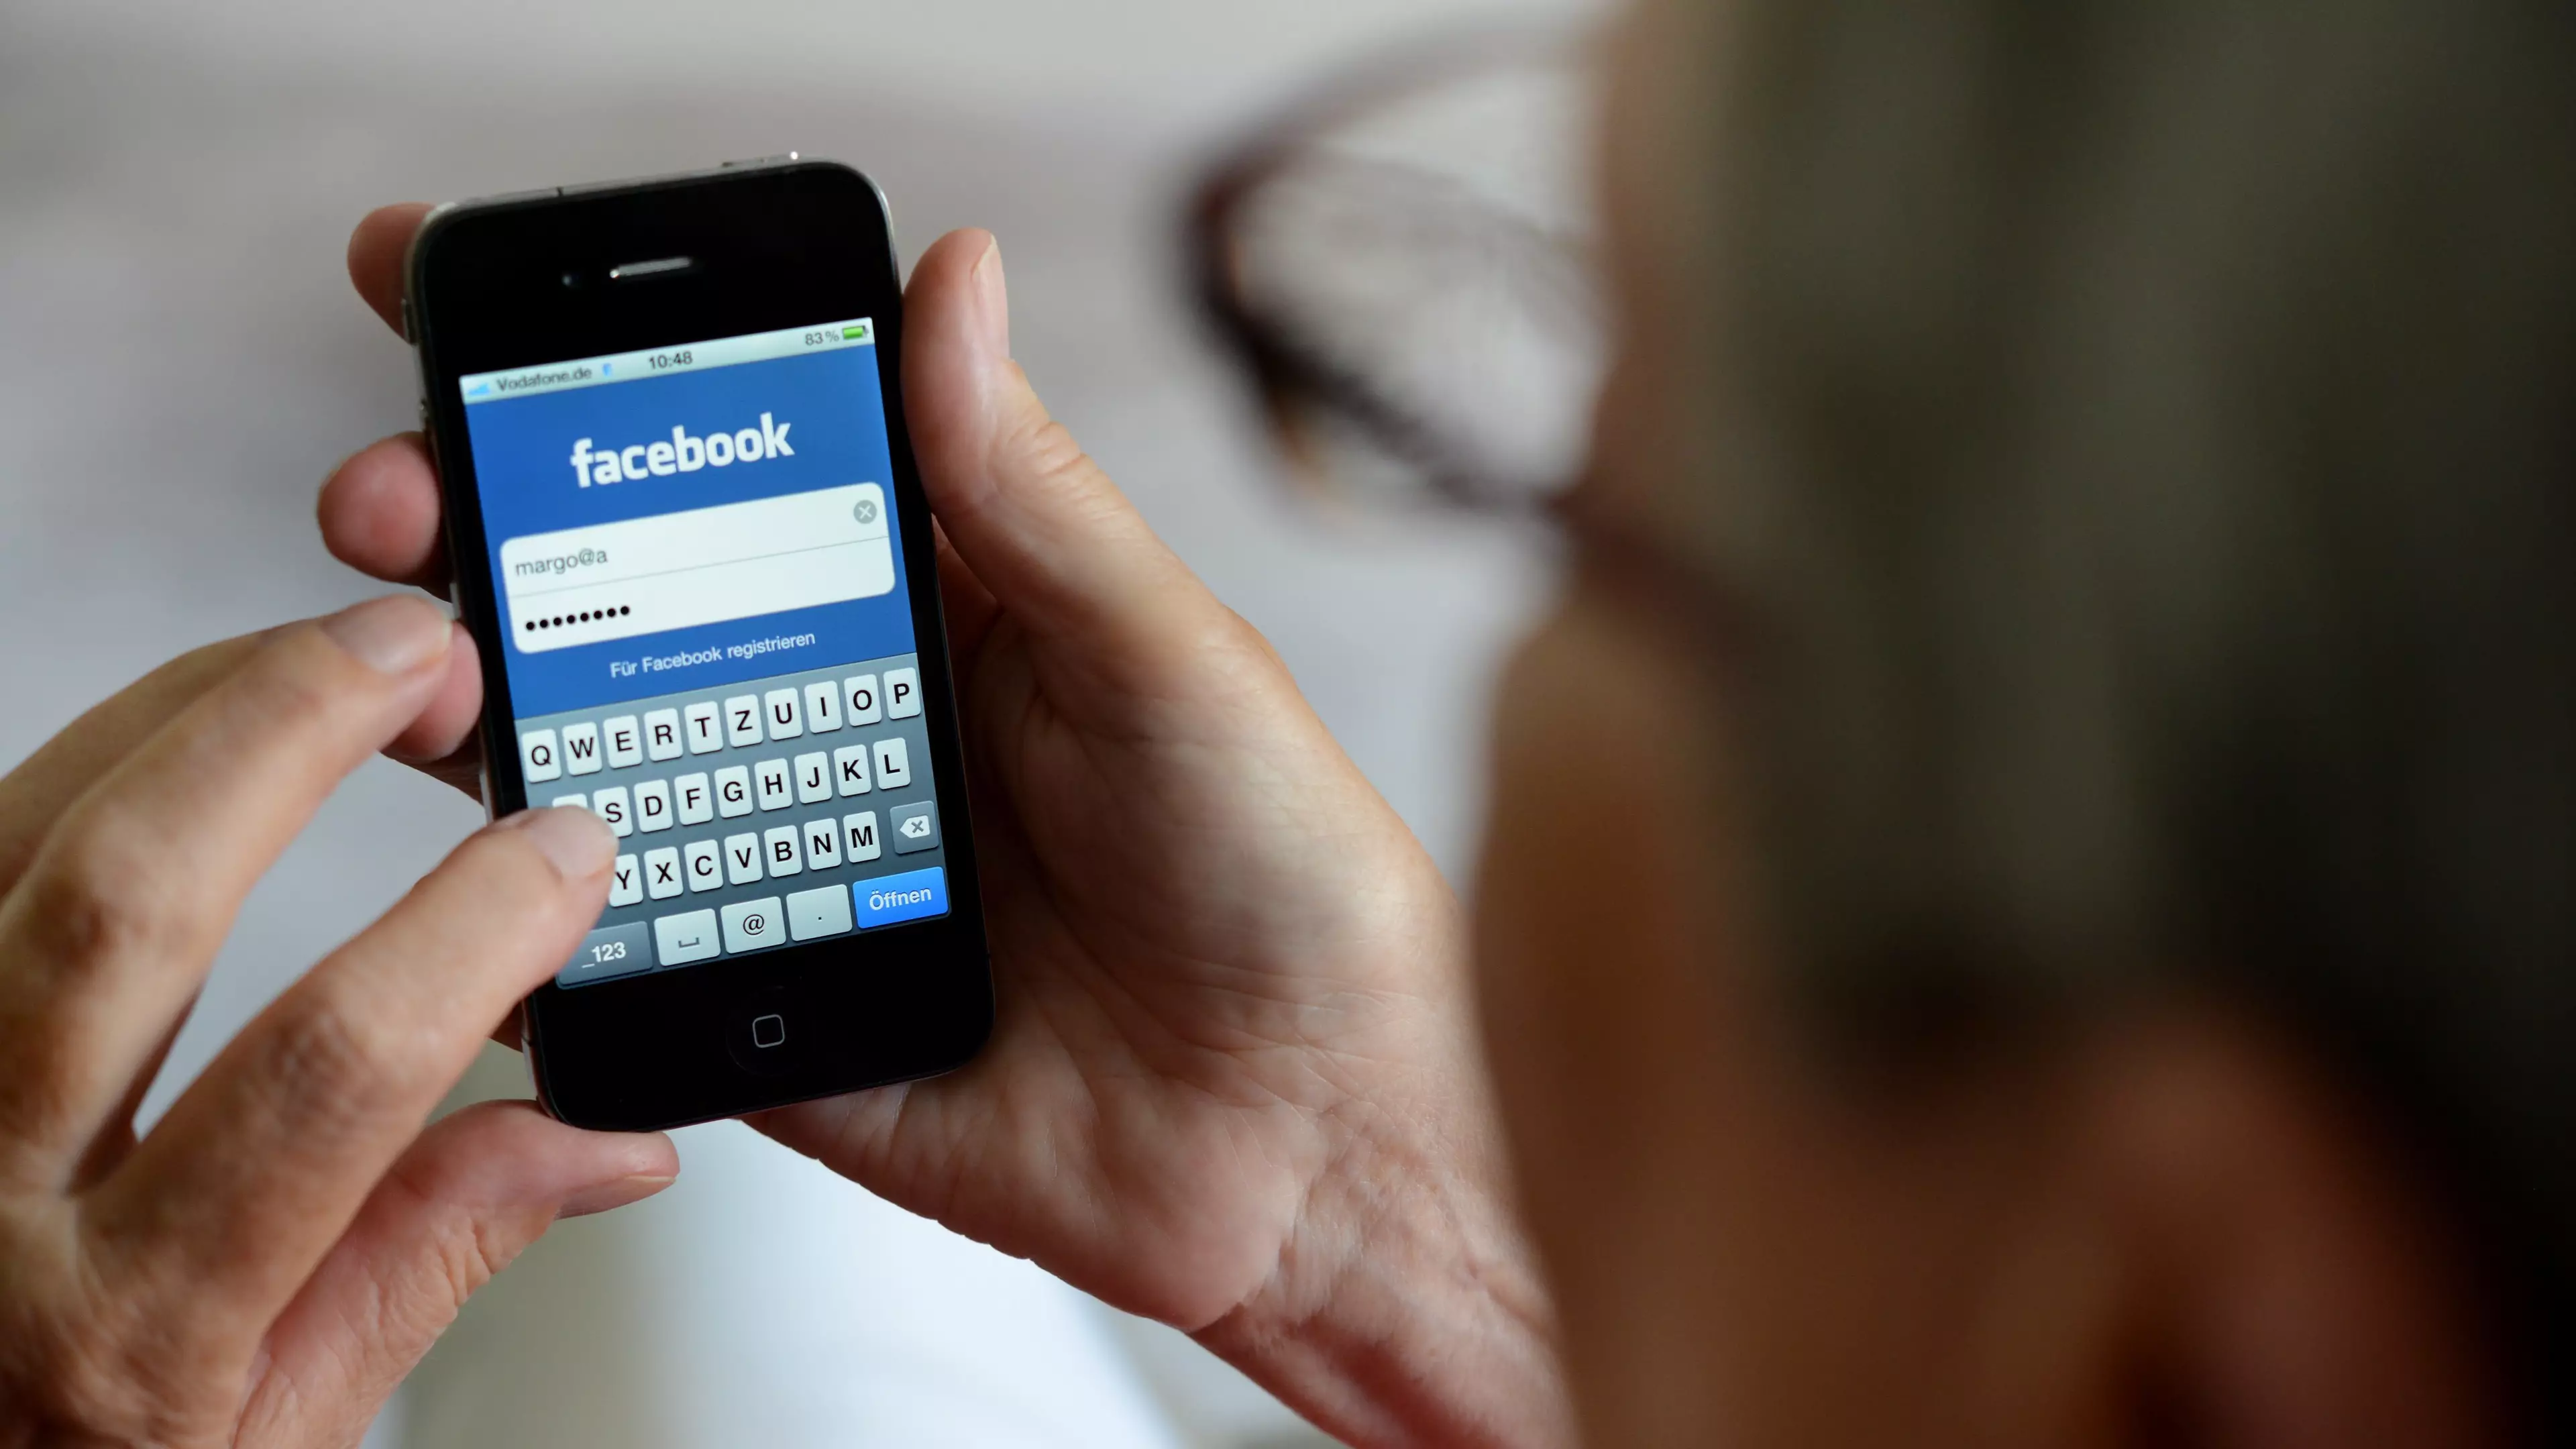 Facebook Logs IPhone Users Out Of App